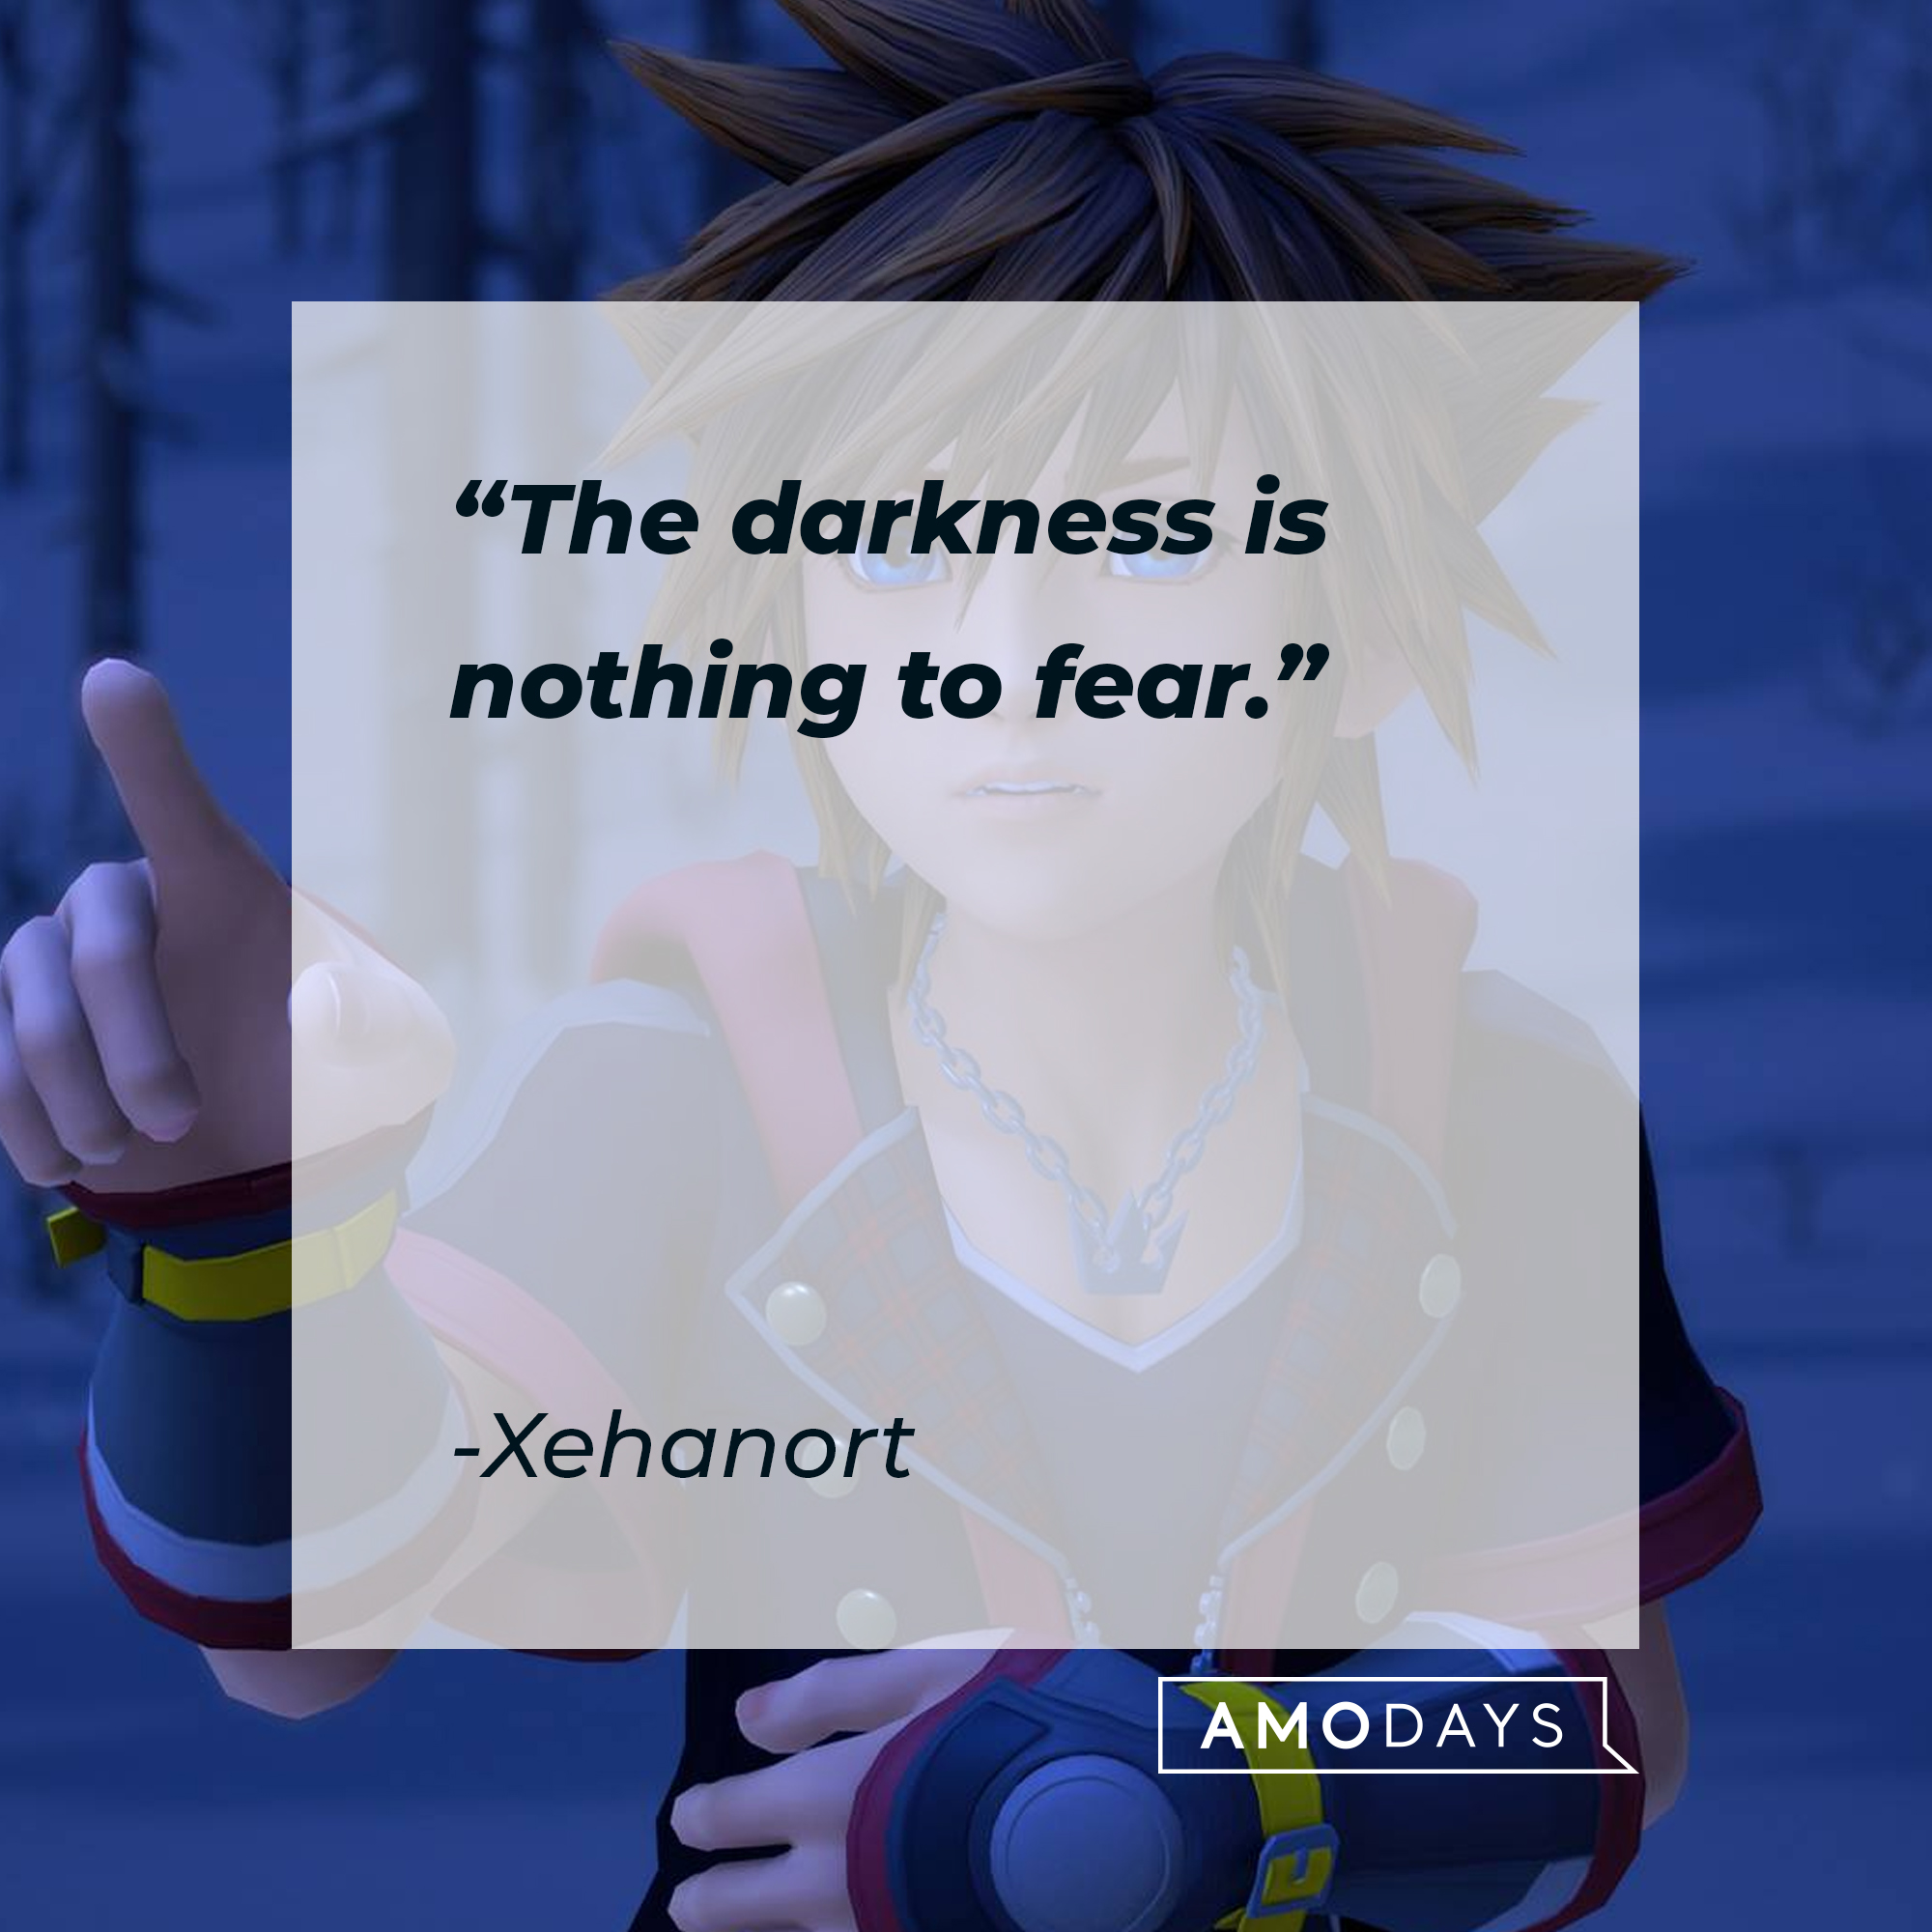 An image of Sora with Xehanort’s quote: “The darkness is nothing to fear.” | Source: facebook.com/KingdomHearts